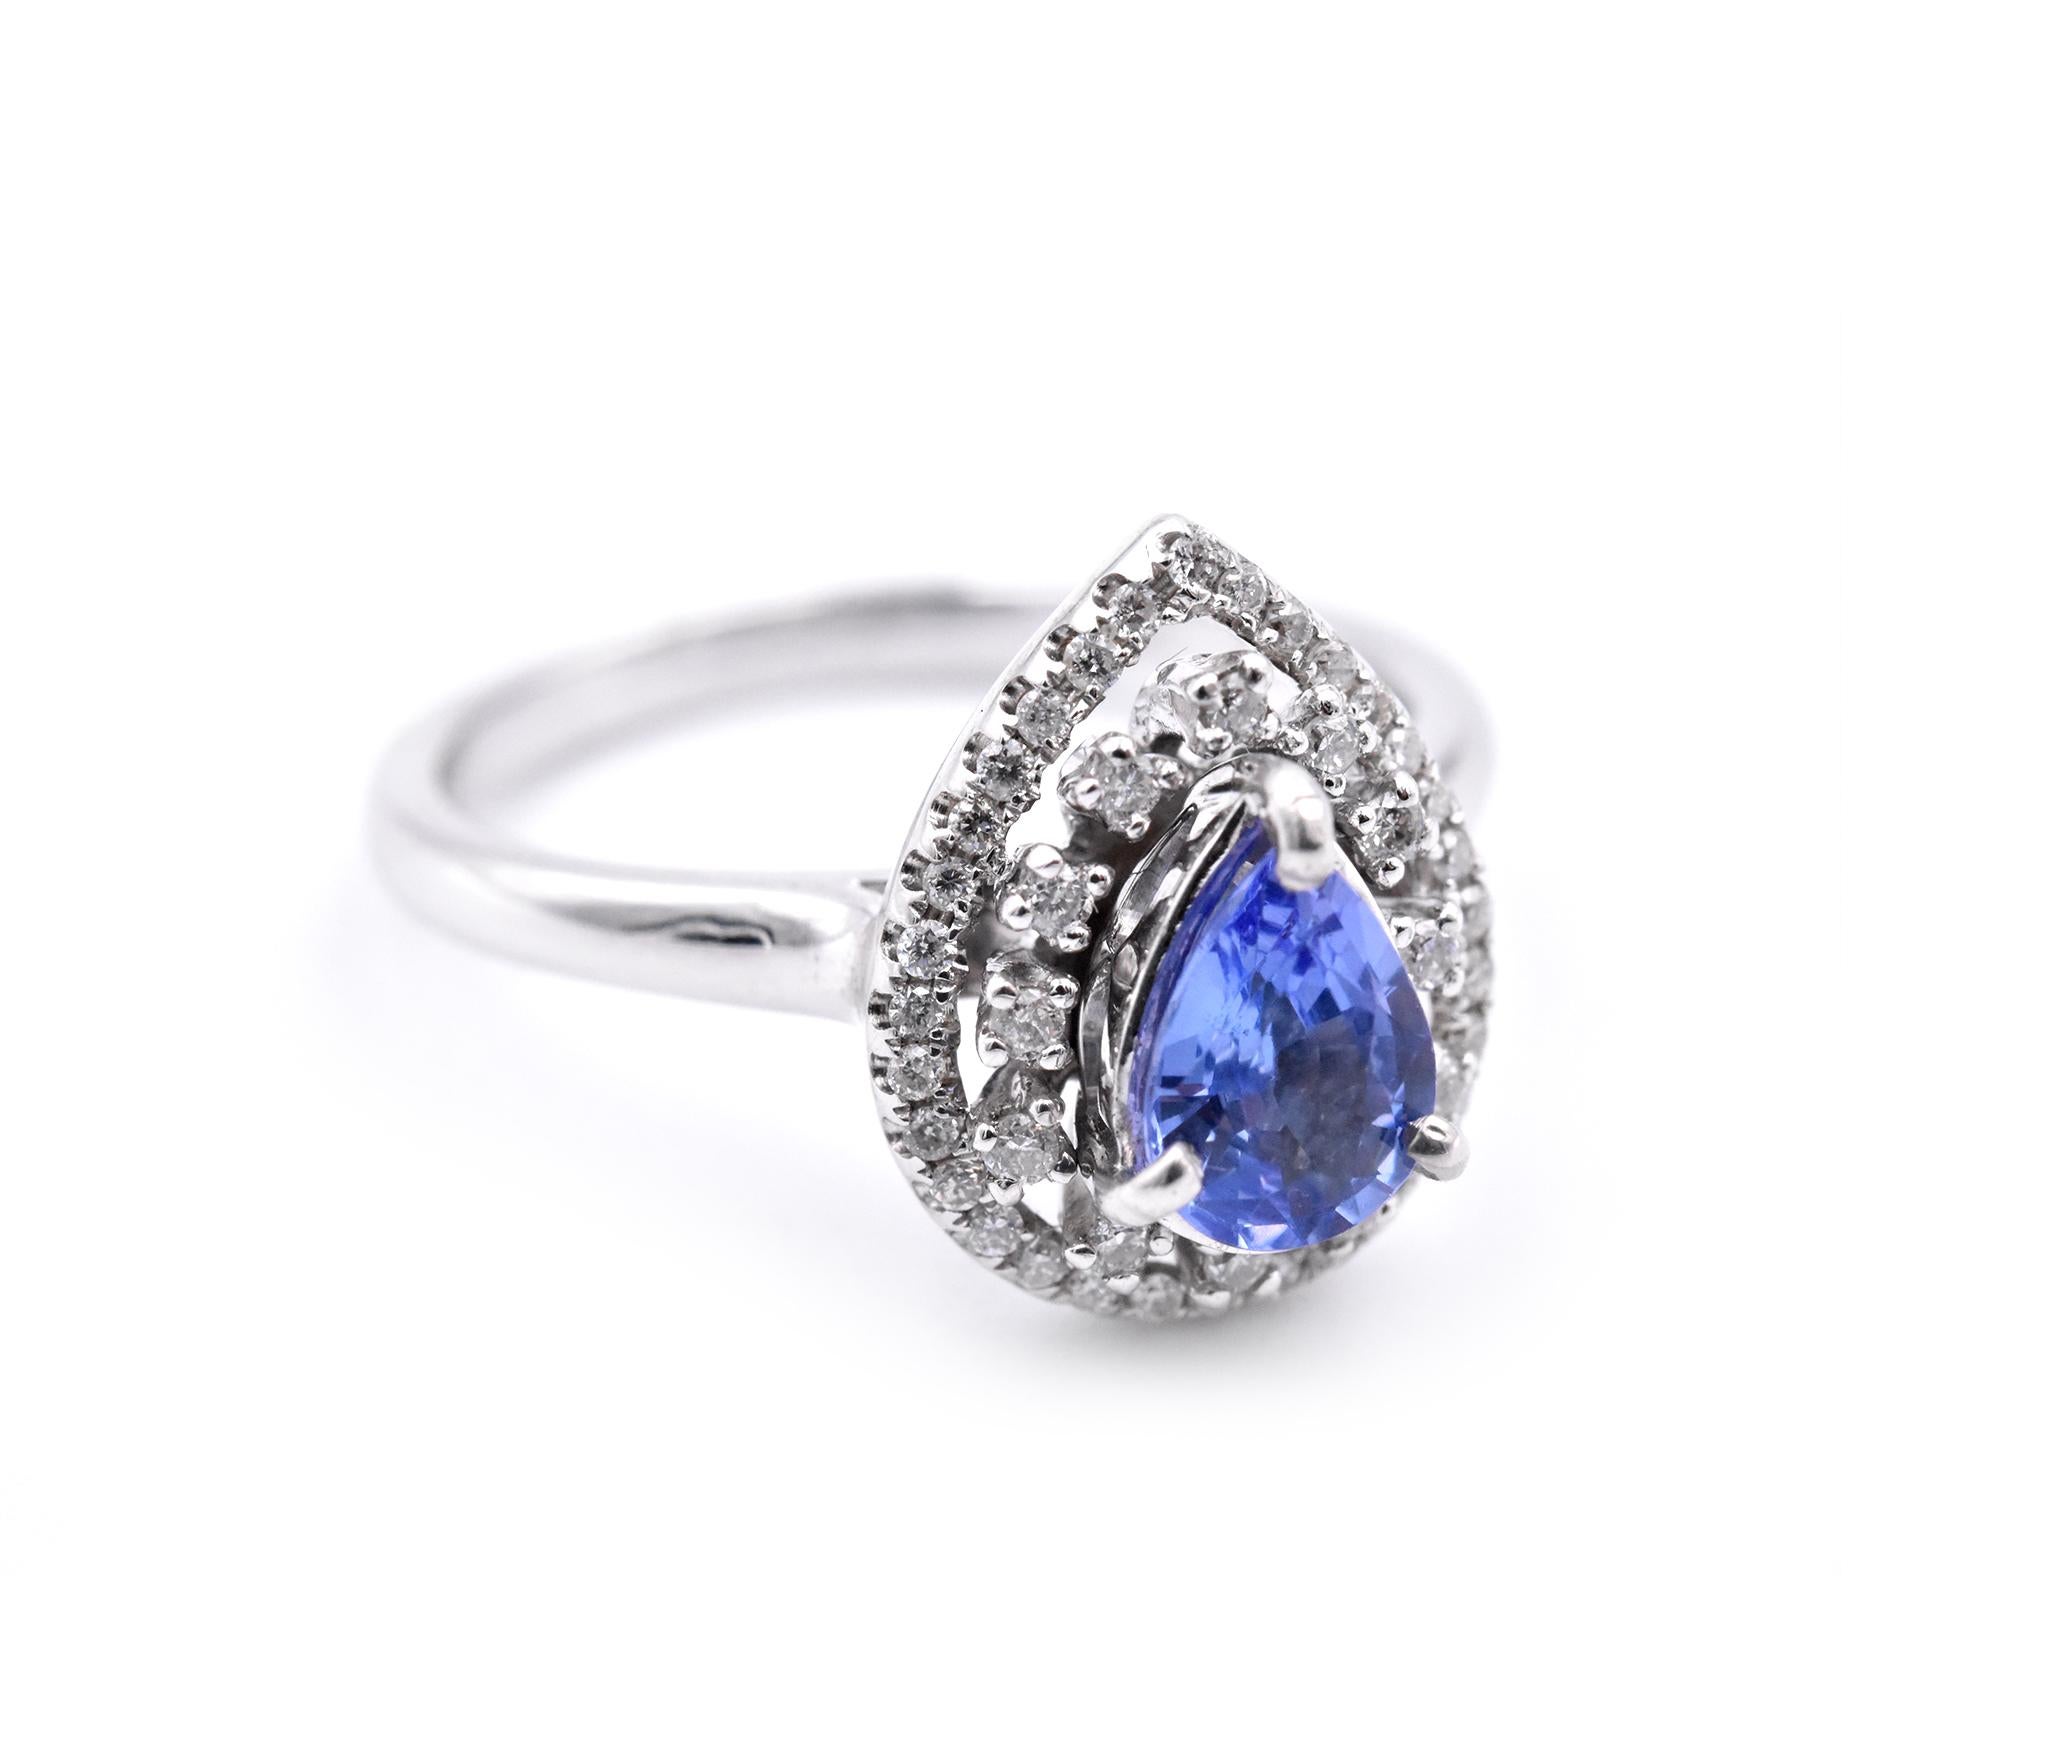 Designer: custom design
Material: 14k white gold
Gemstones: Tanzanite = .85ct PEAR
Certification: AGI 26001
Diamonds: 44 round brilliant cuts = .33cttw
Color: F/G
Clarity: VS-SI
Ring Size: 7.5 (please allow two additional shipping days for sizing